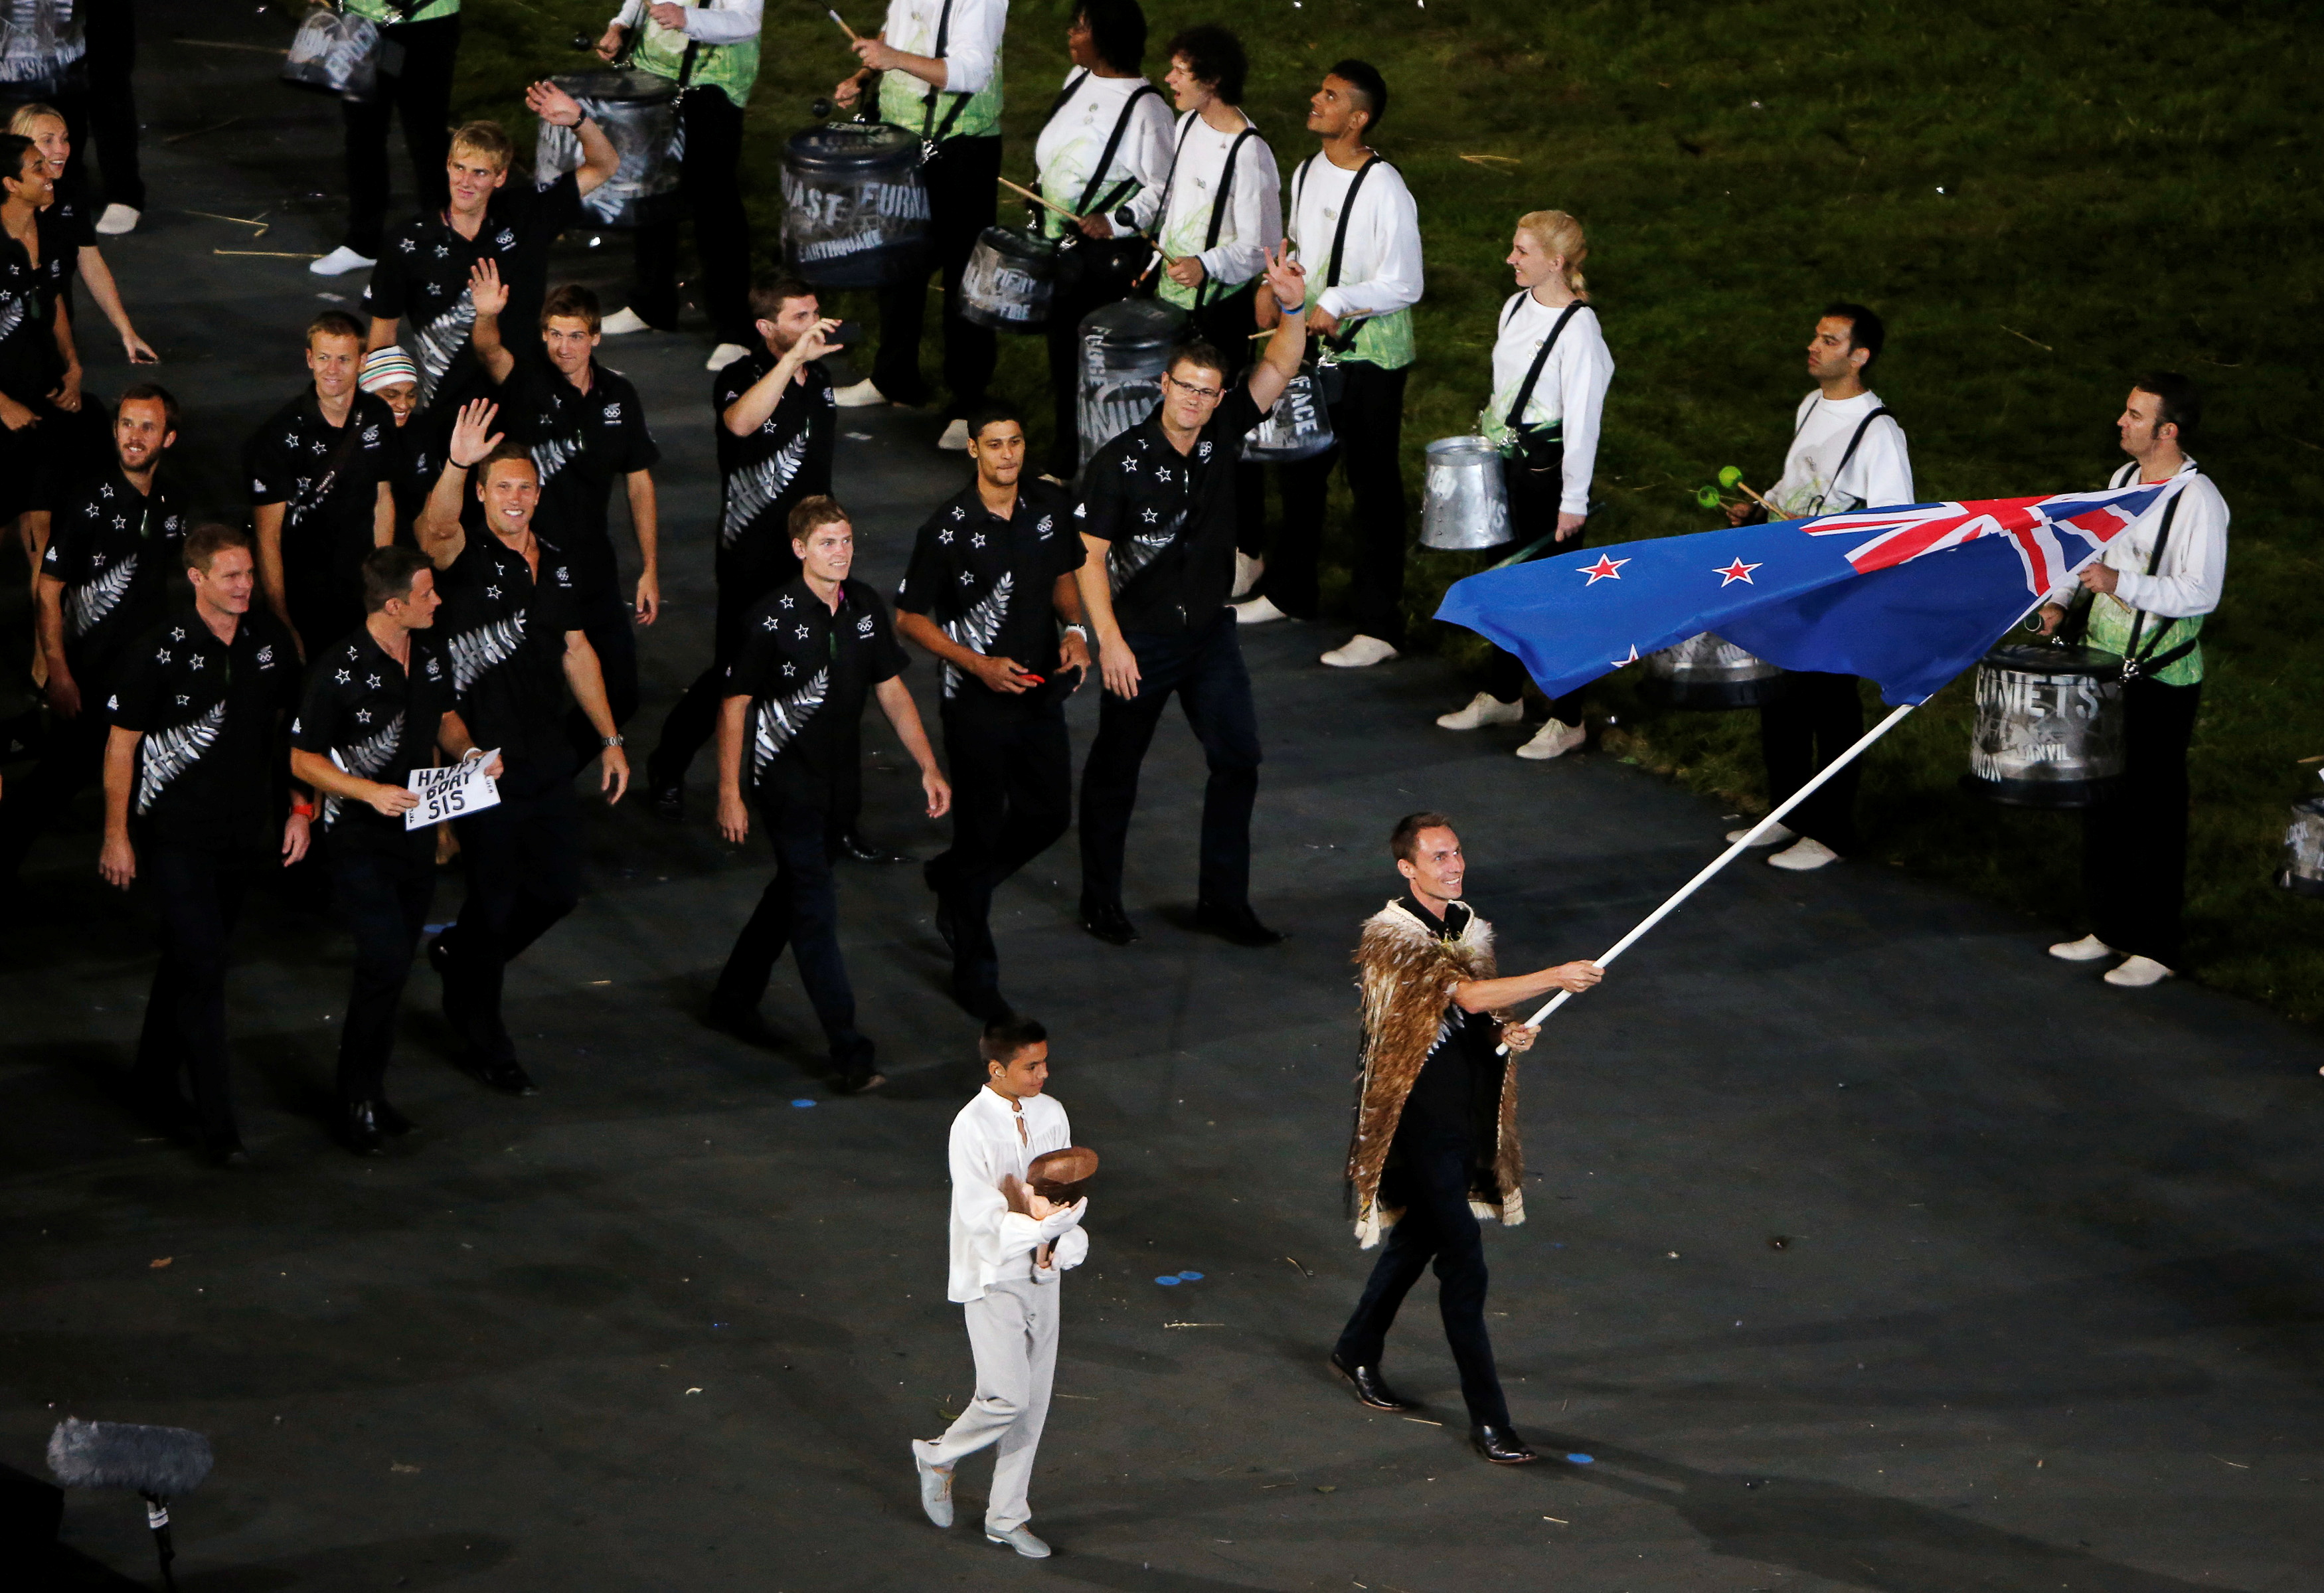 New Zealand's flag bearer Nick Willis holds the national flag as he leads the contingent in the athletes parade during the opening ceremony of the London 2012 Olympic Games at the Olympic Stadium